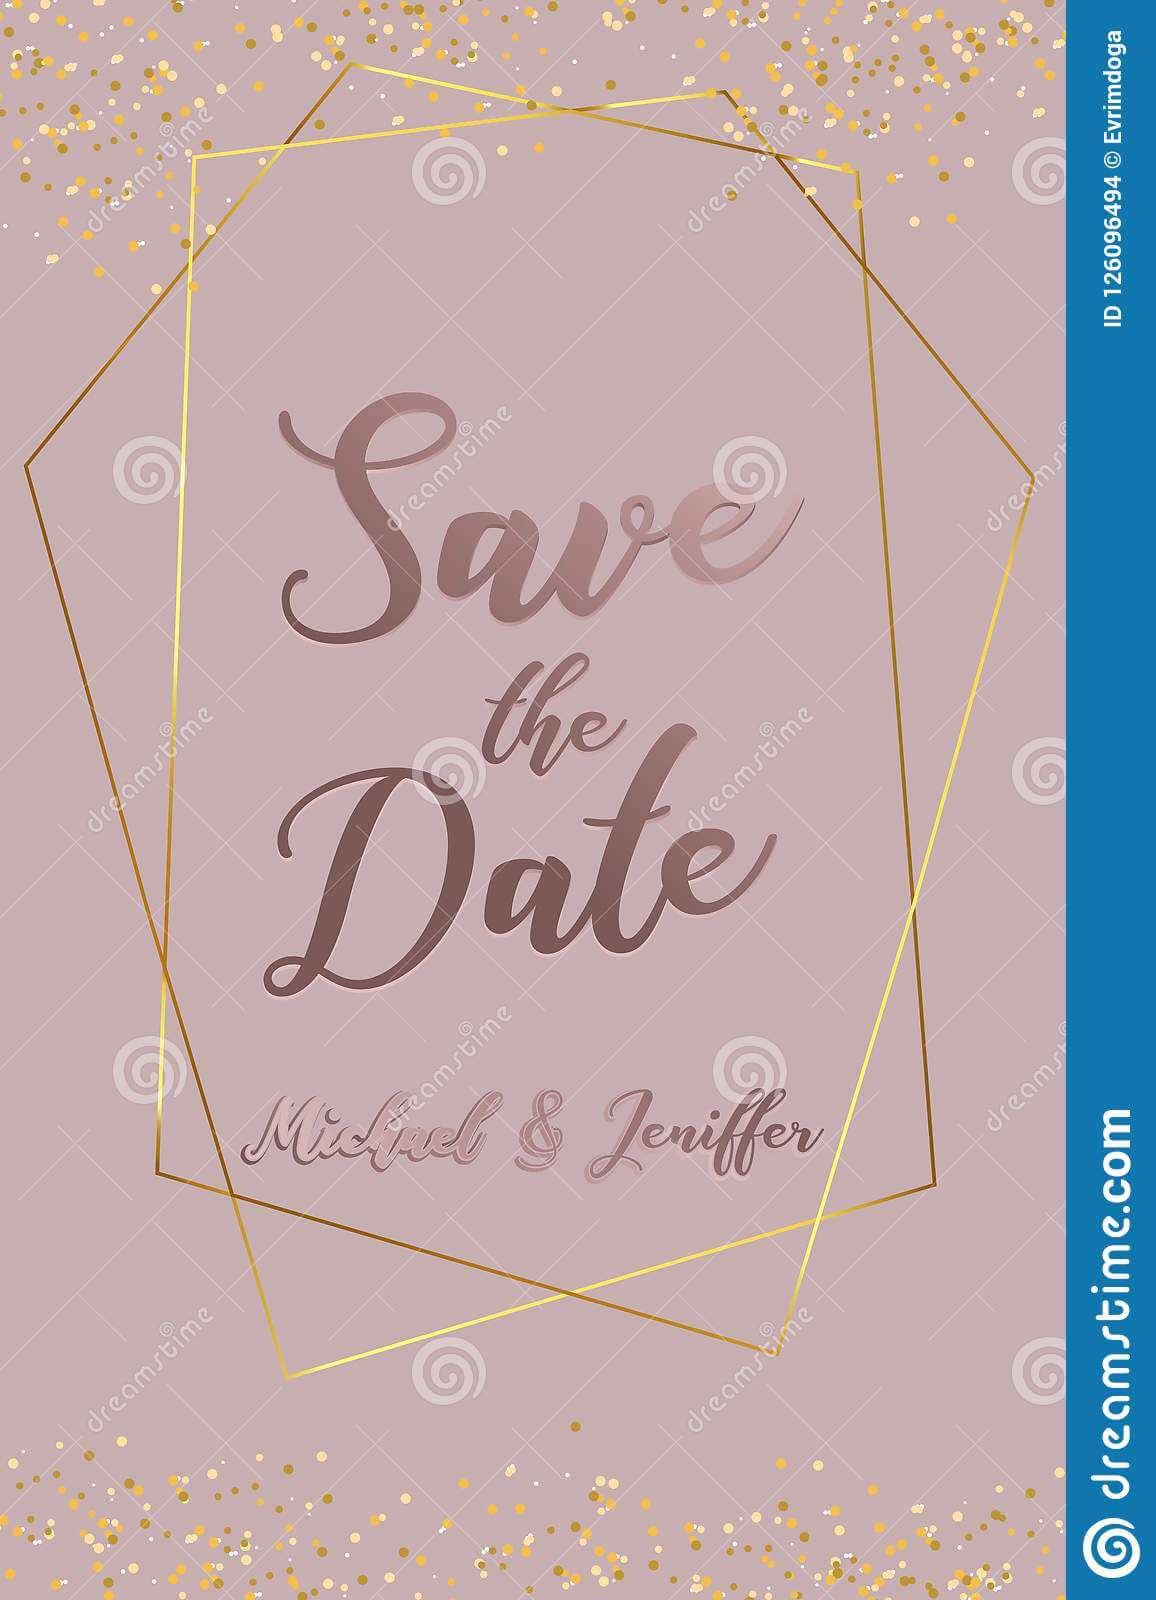 Wedding Invitation, Thank You Card, Save The Date Card With Save The Date Banner Template